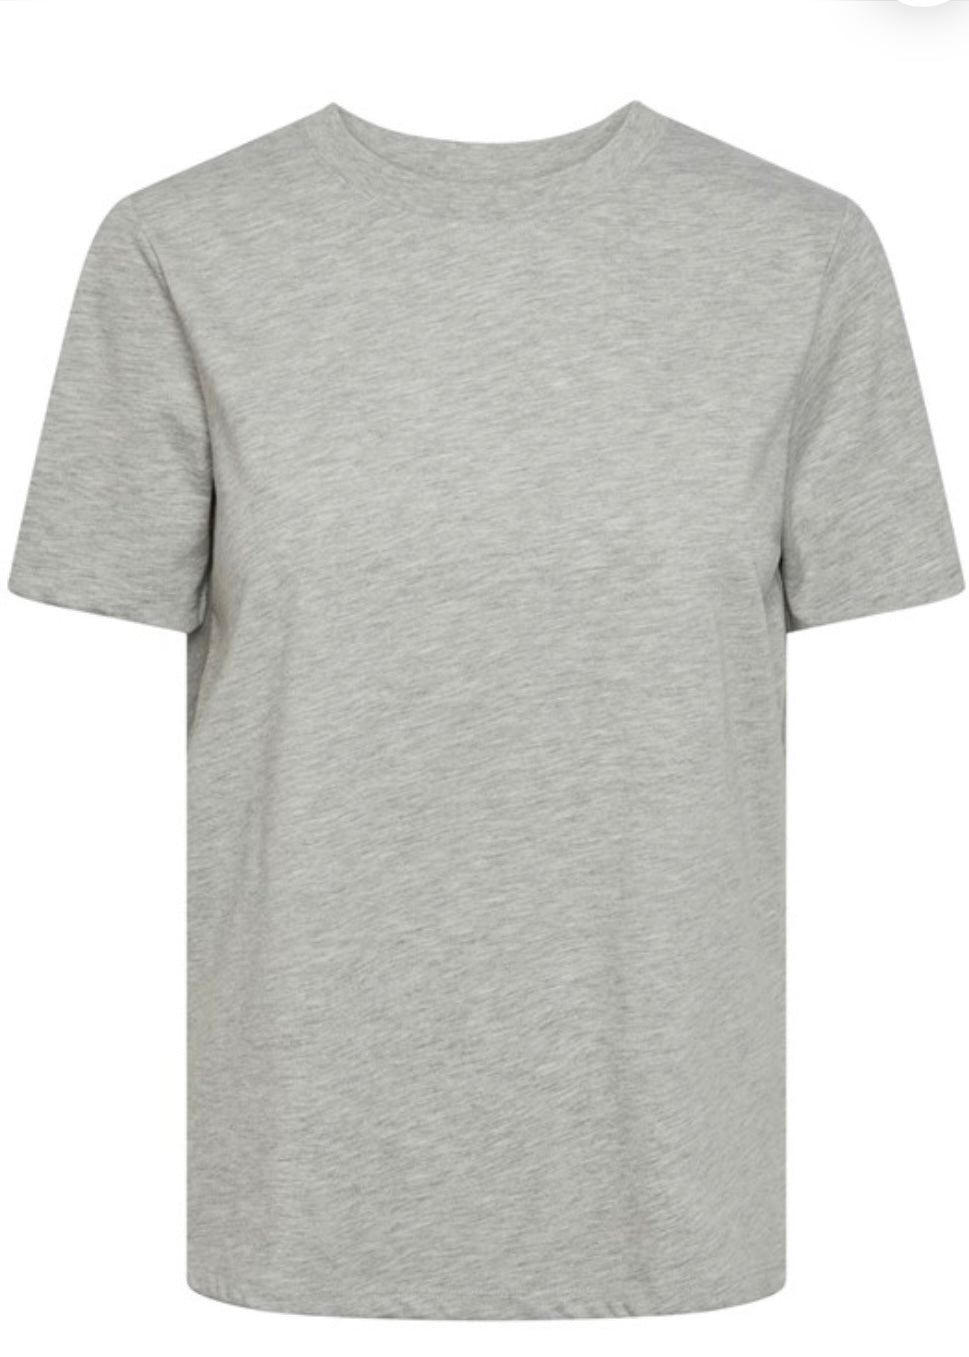 PIECES - RIA FOLD UP SOLID TEE - LIGHT GREY MELANGE